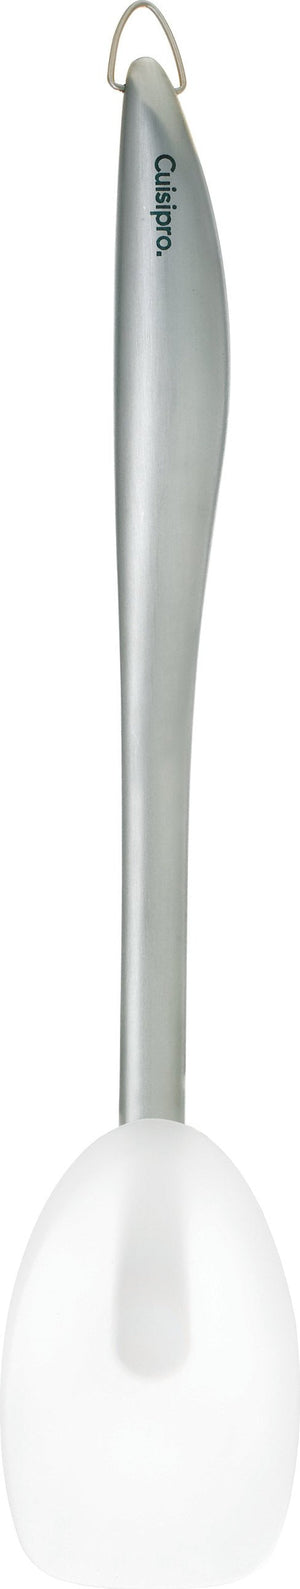 Cuisipro - 11" Frosted Silicone Spatula (28 cm) - 74683700